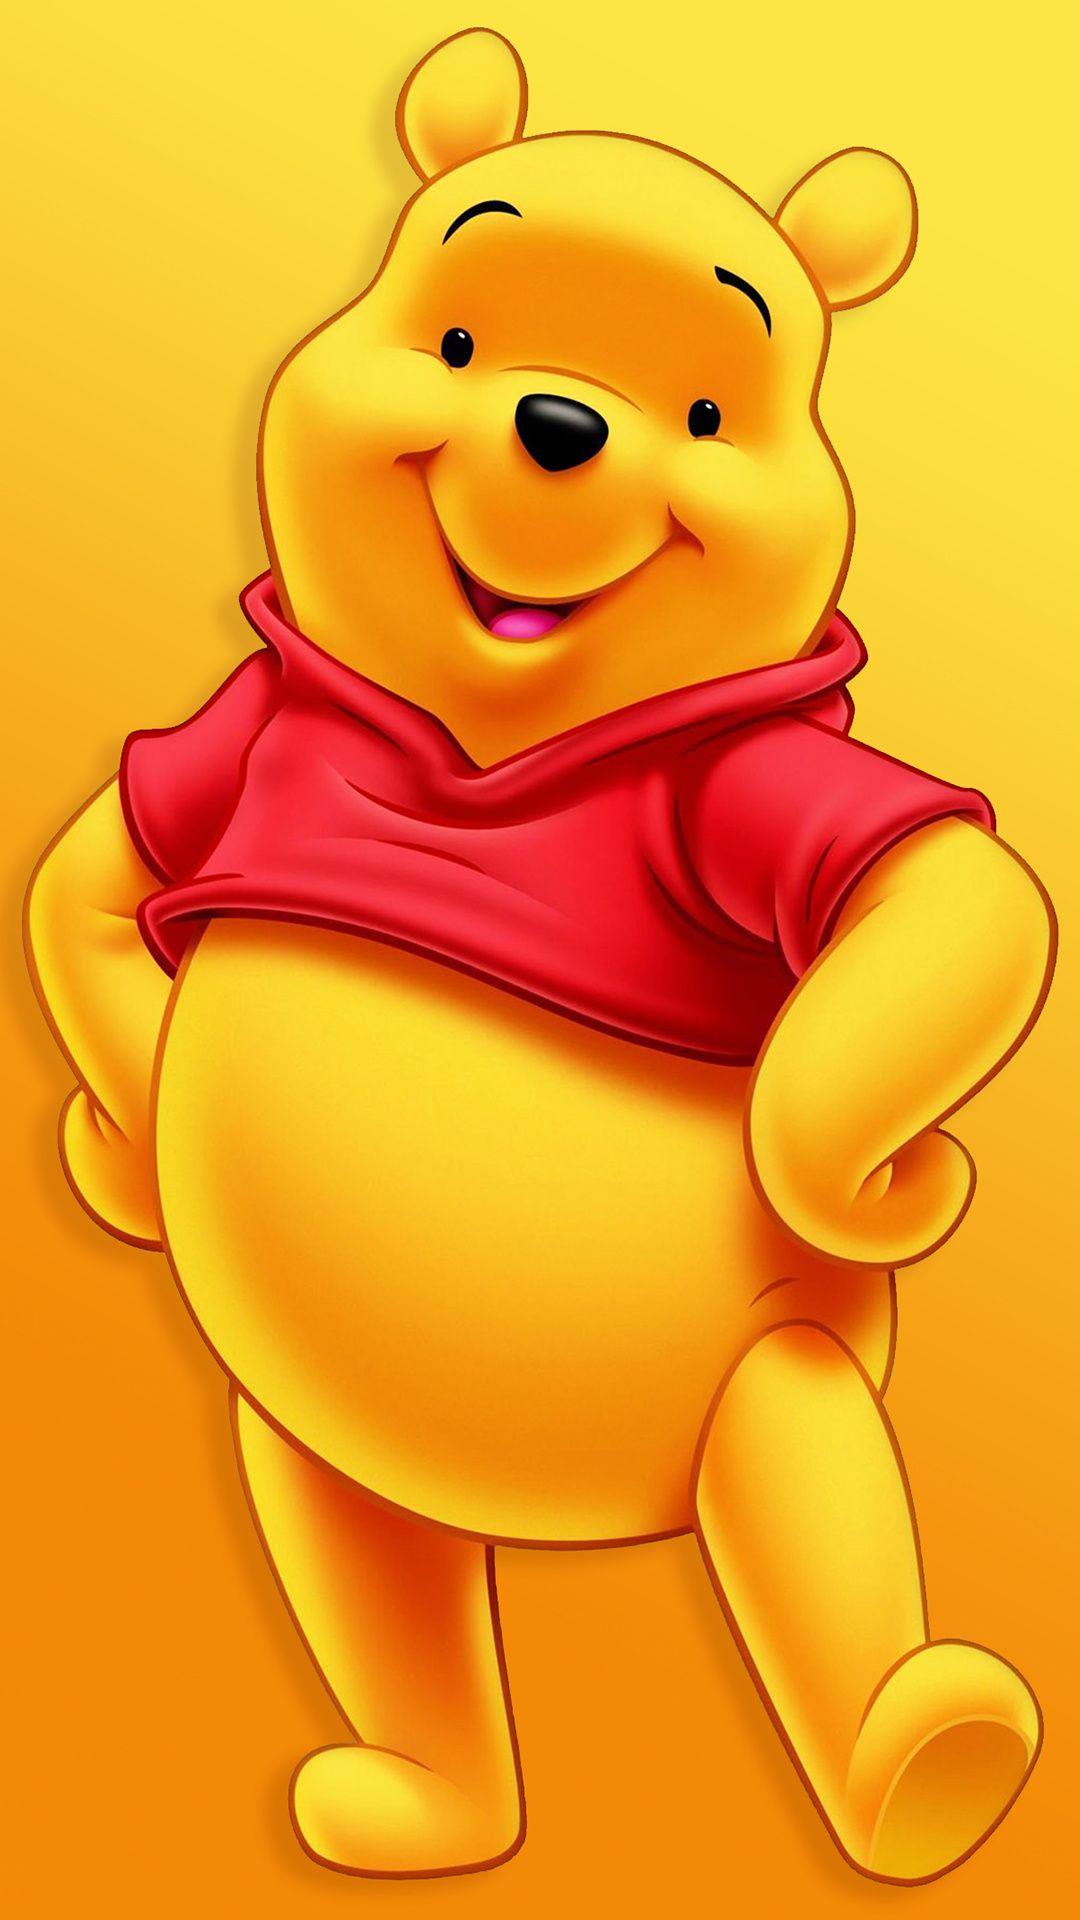 Wallpapers Winnie The Pooh - Wallpaper Cave